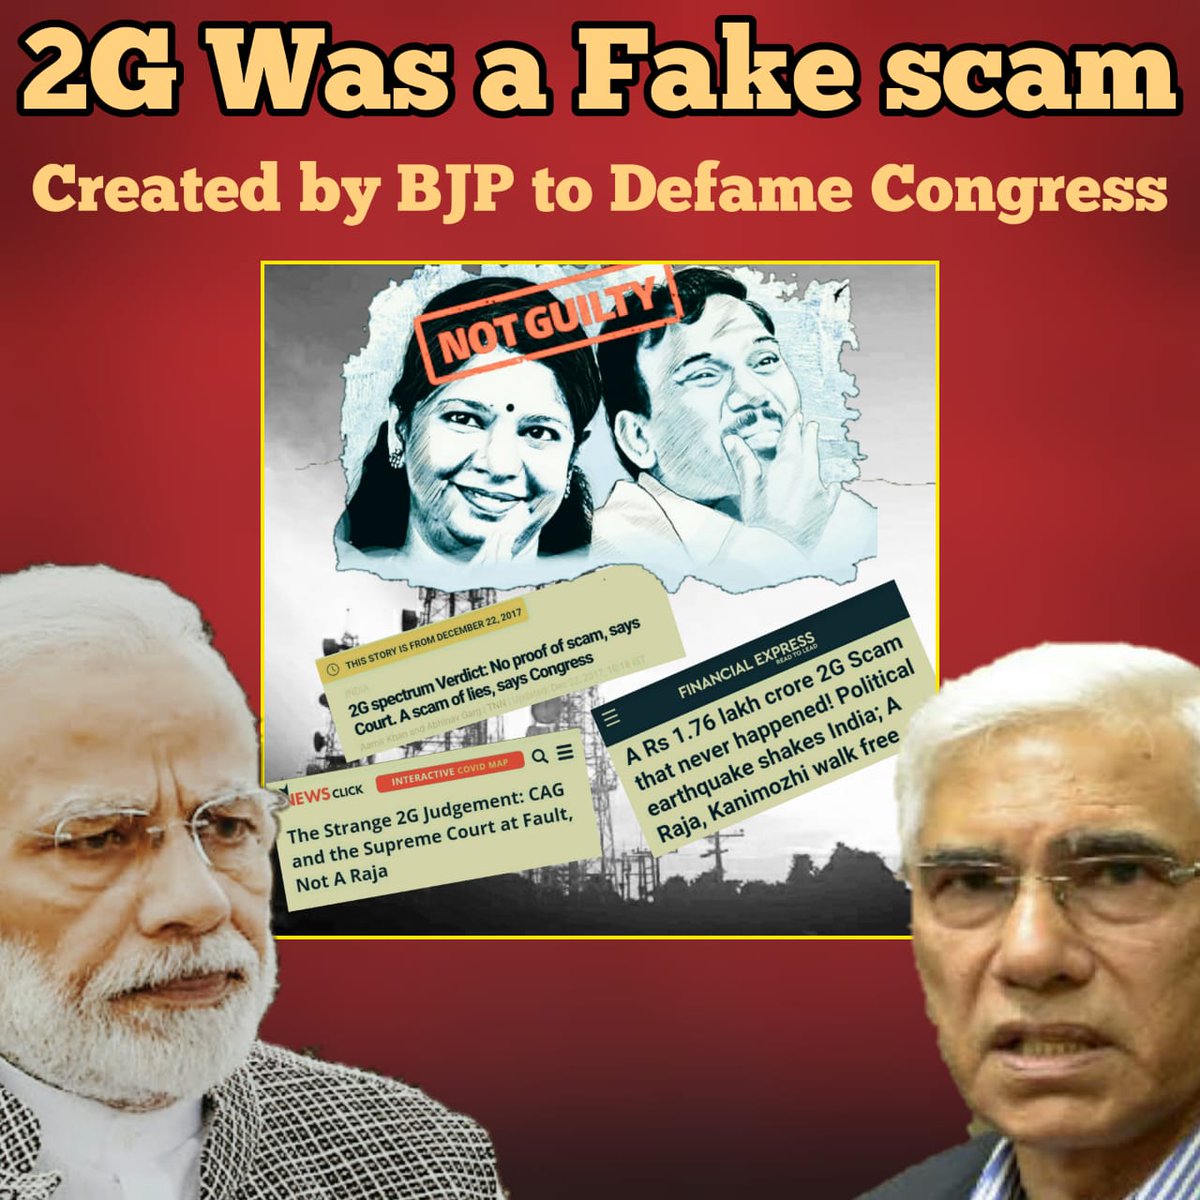 INCians,

Here's your first task. BJPs biggest 'Bramhastra' before 2014 was allegations of the 2G scam against UPA. However, according to a special court, there was no scam.

Please spread this across Twitter, FB, Insta, WA.

Reply with 'Done' once you share.

#ShareTheTruth